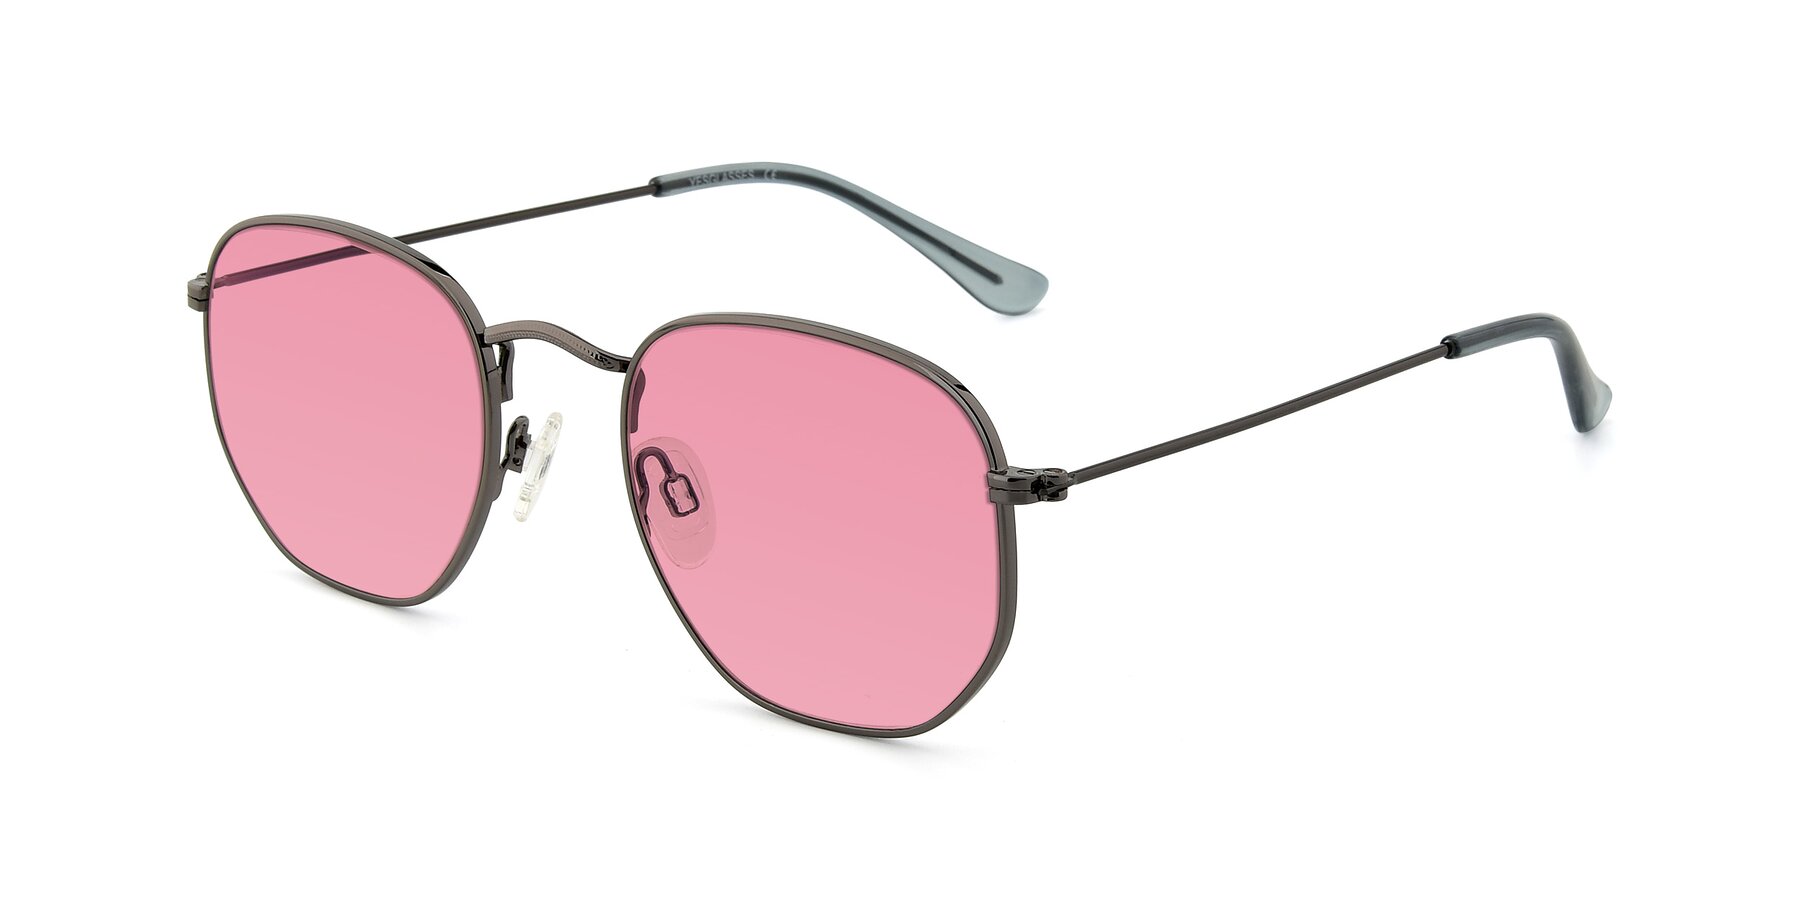 Angle of SSR1943 in Grey with Pink Tinted Lenses